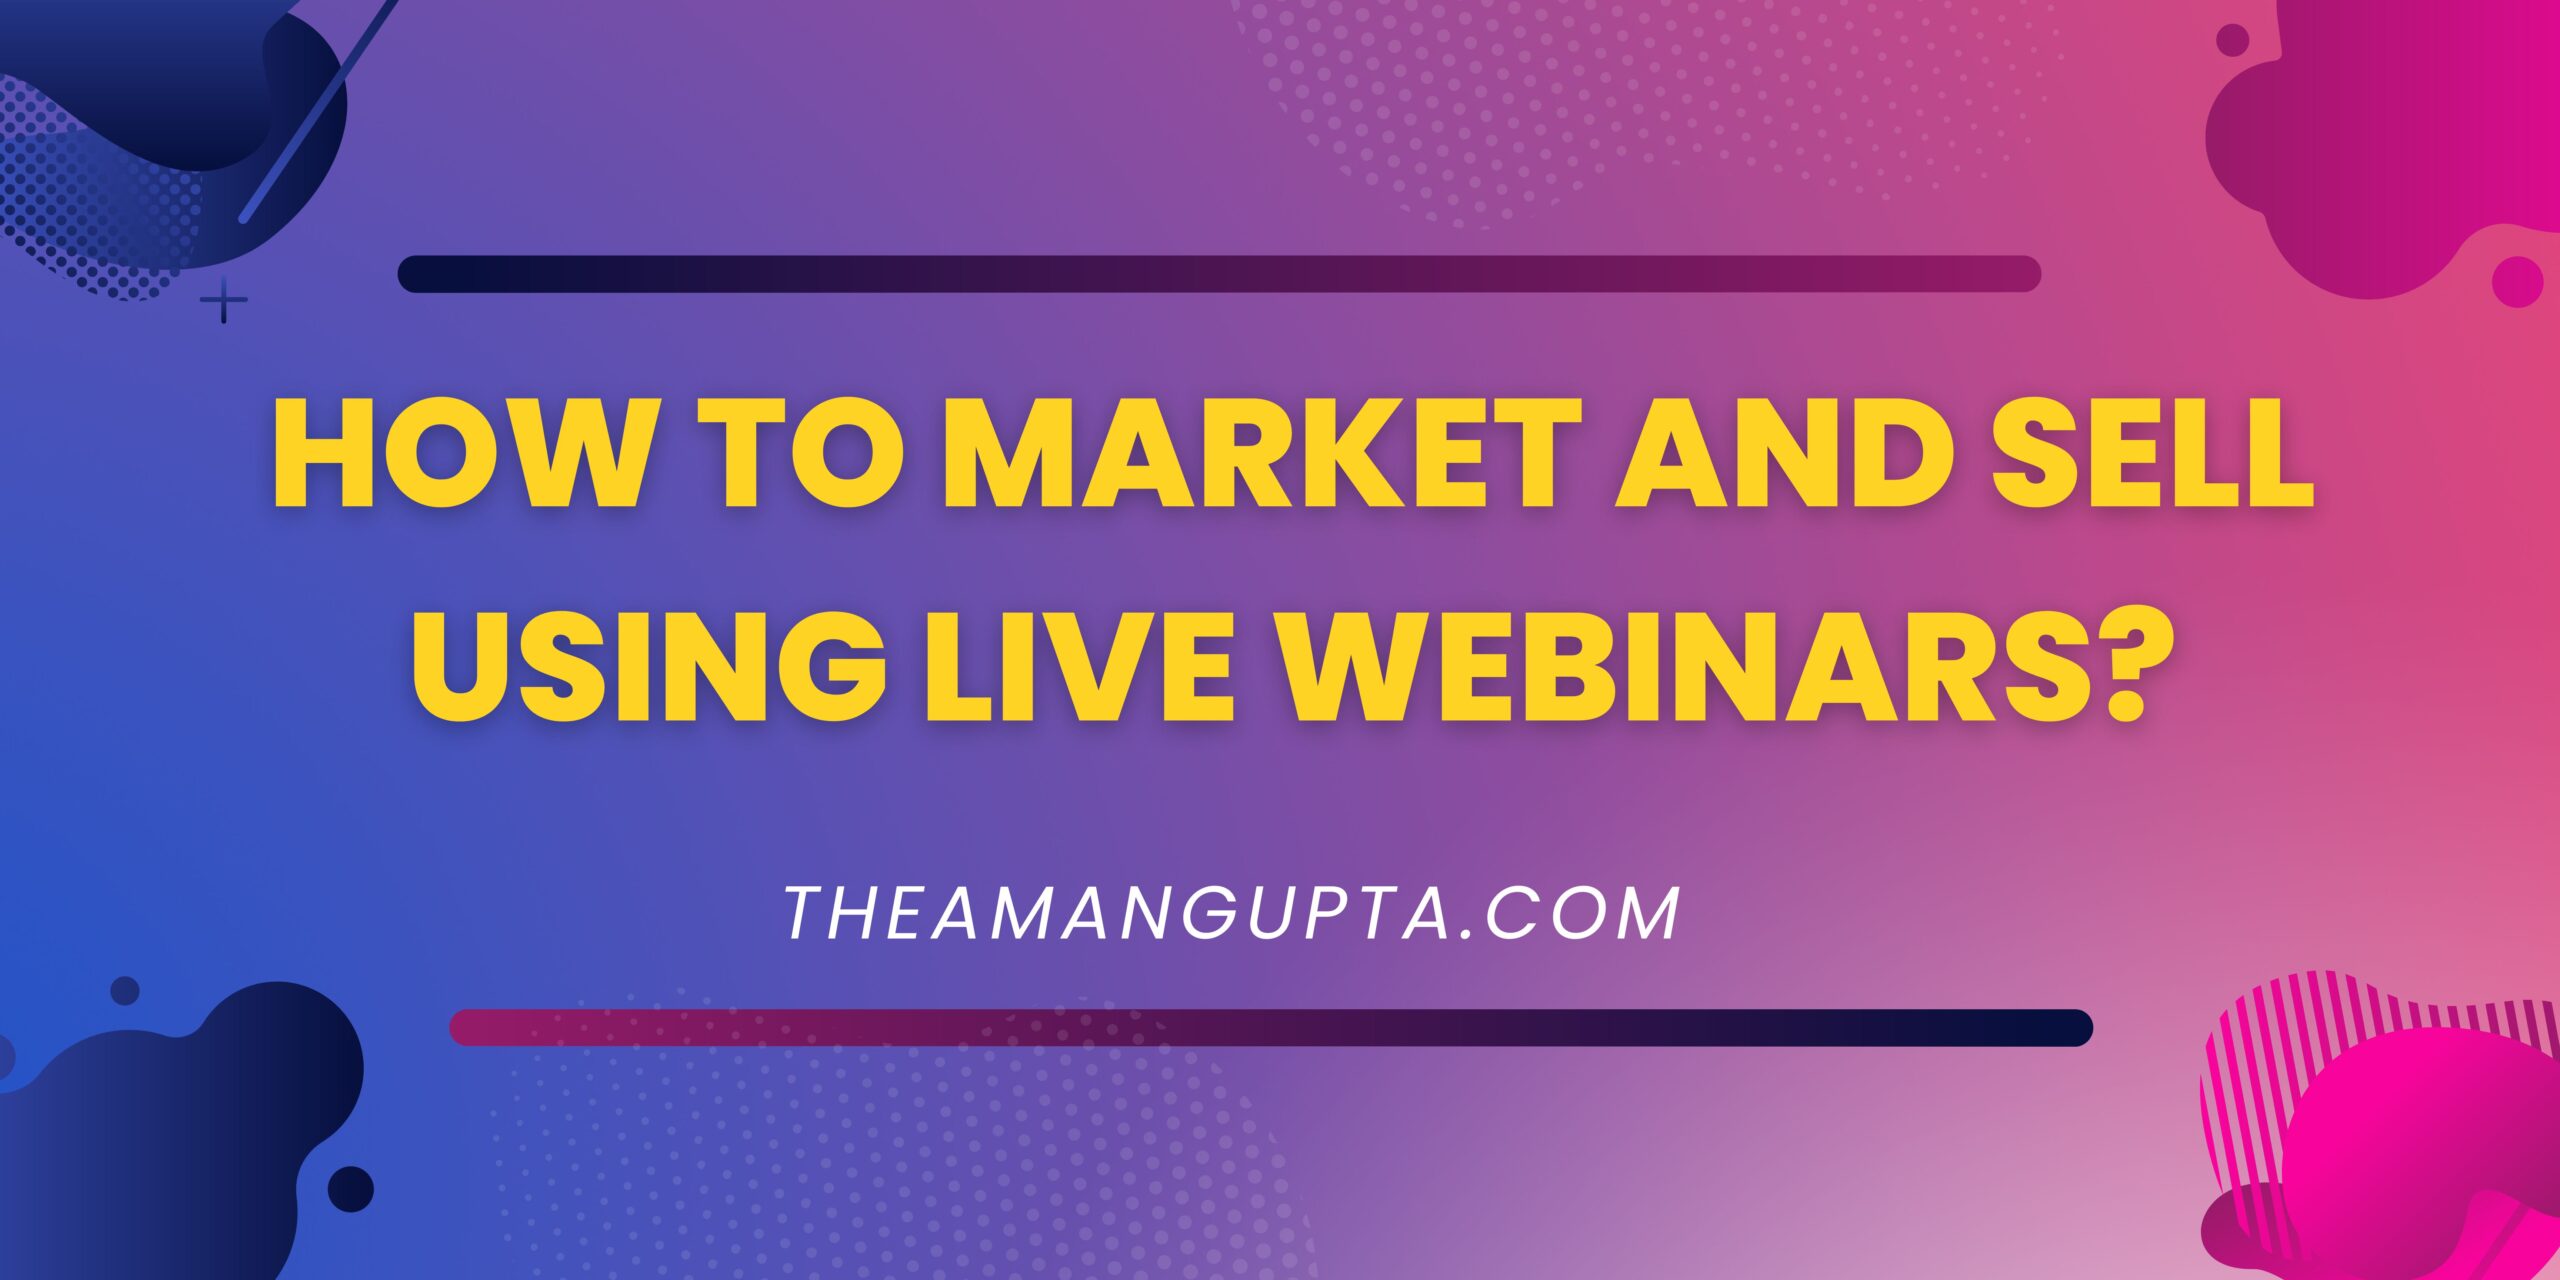 How To Market And Sell Using Live Webinars|Live Webinars|Theamangupta|Theamangupta